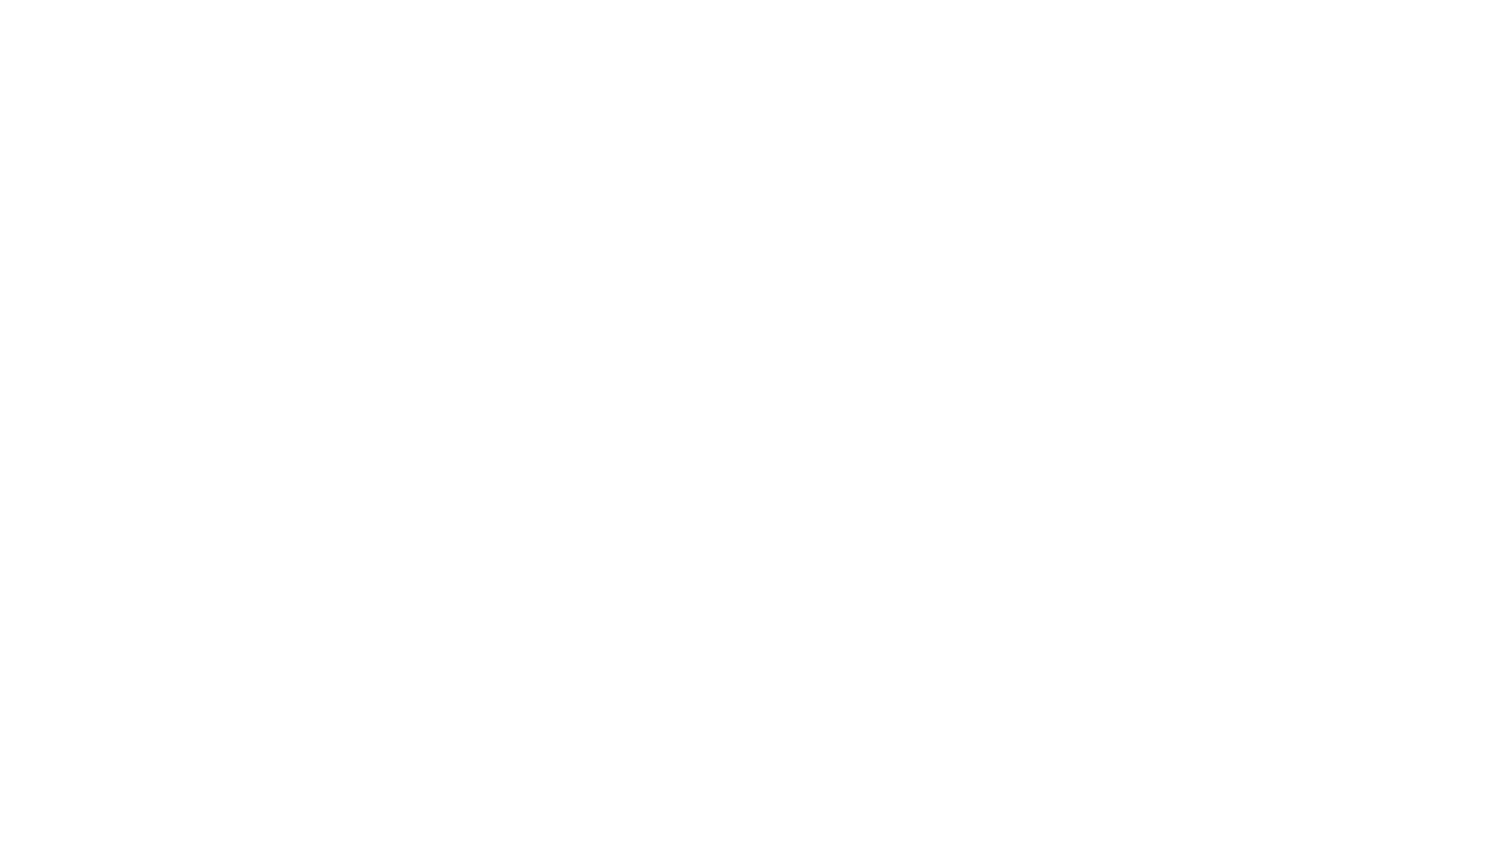 Streamliner Productions